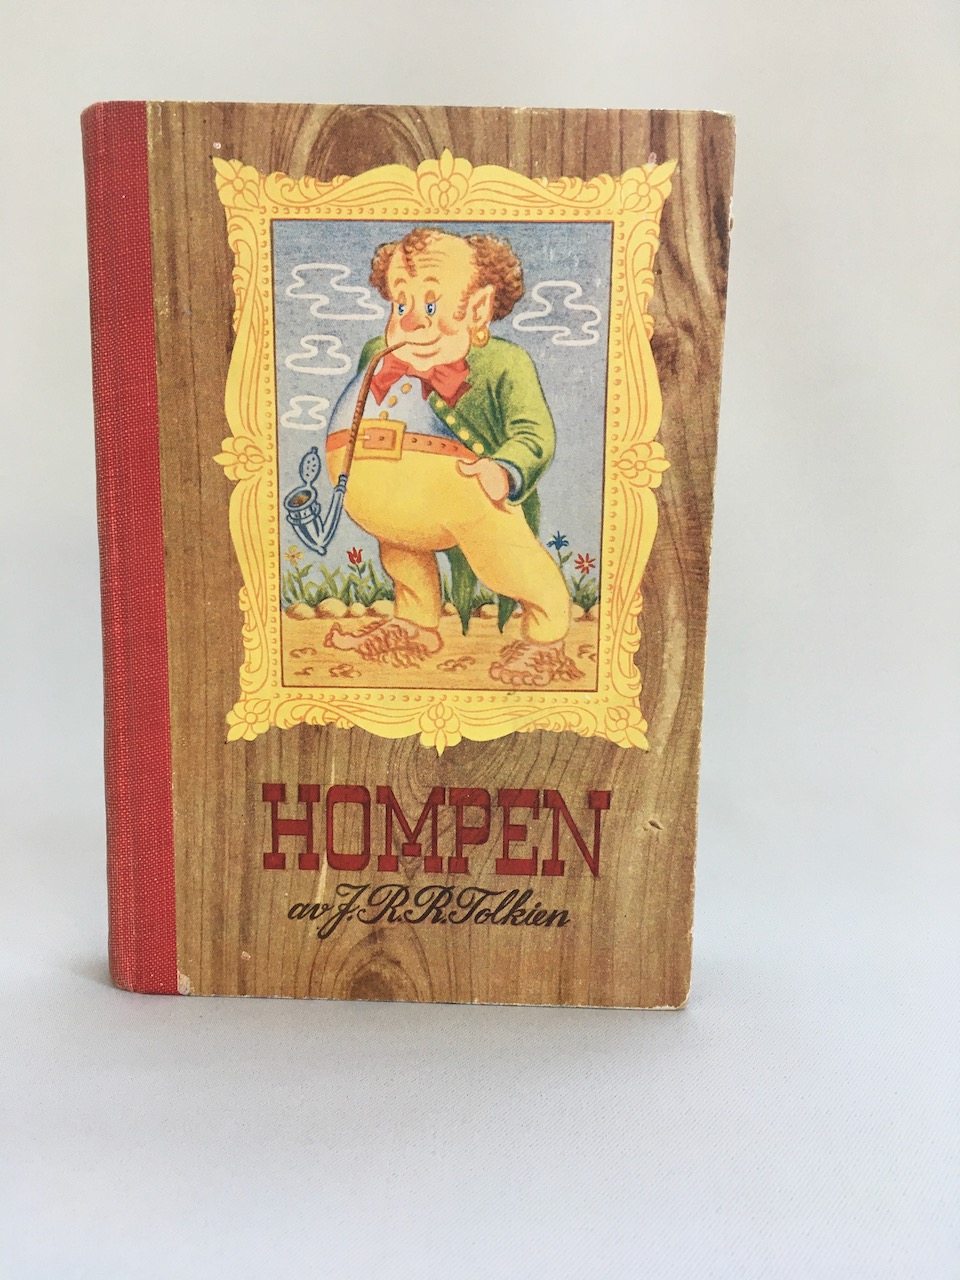 Hompen, 1947, first Swedish edition - first translation of The Hobbit into any language 3